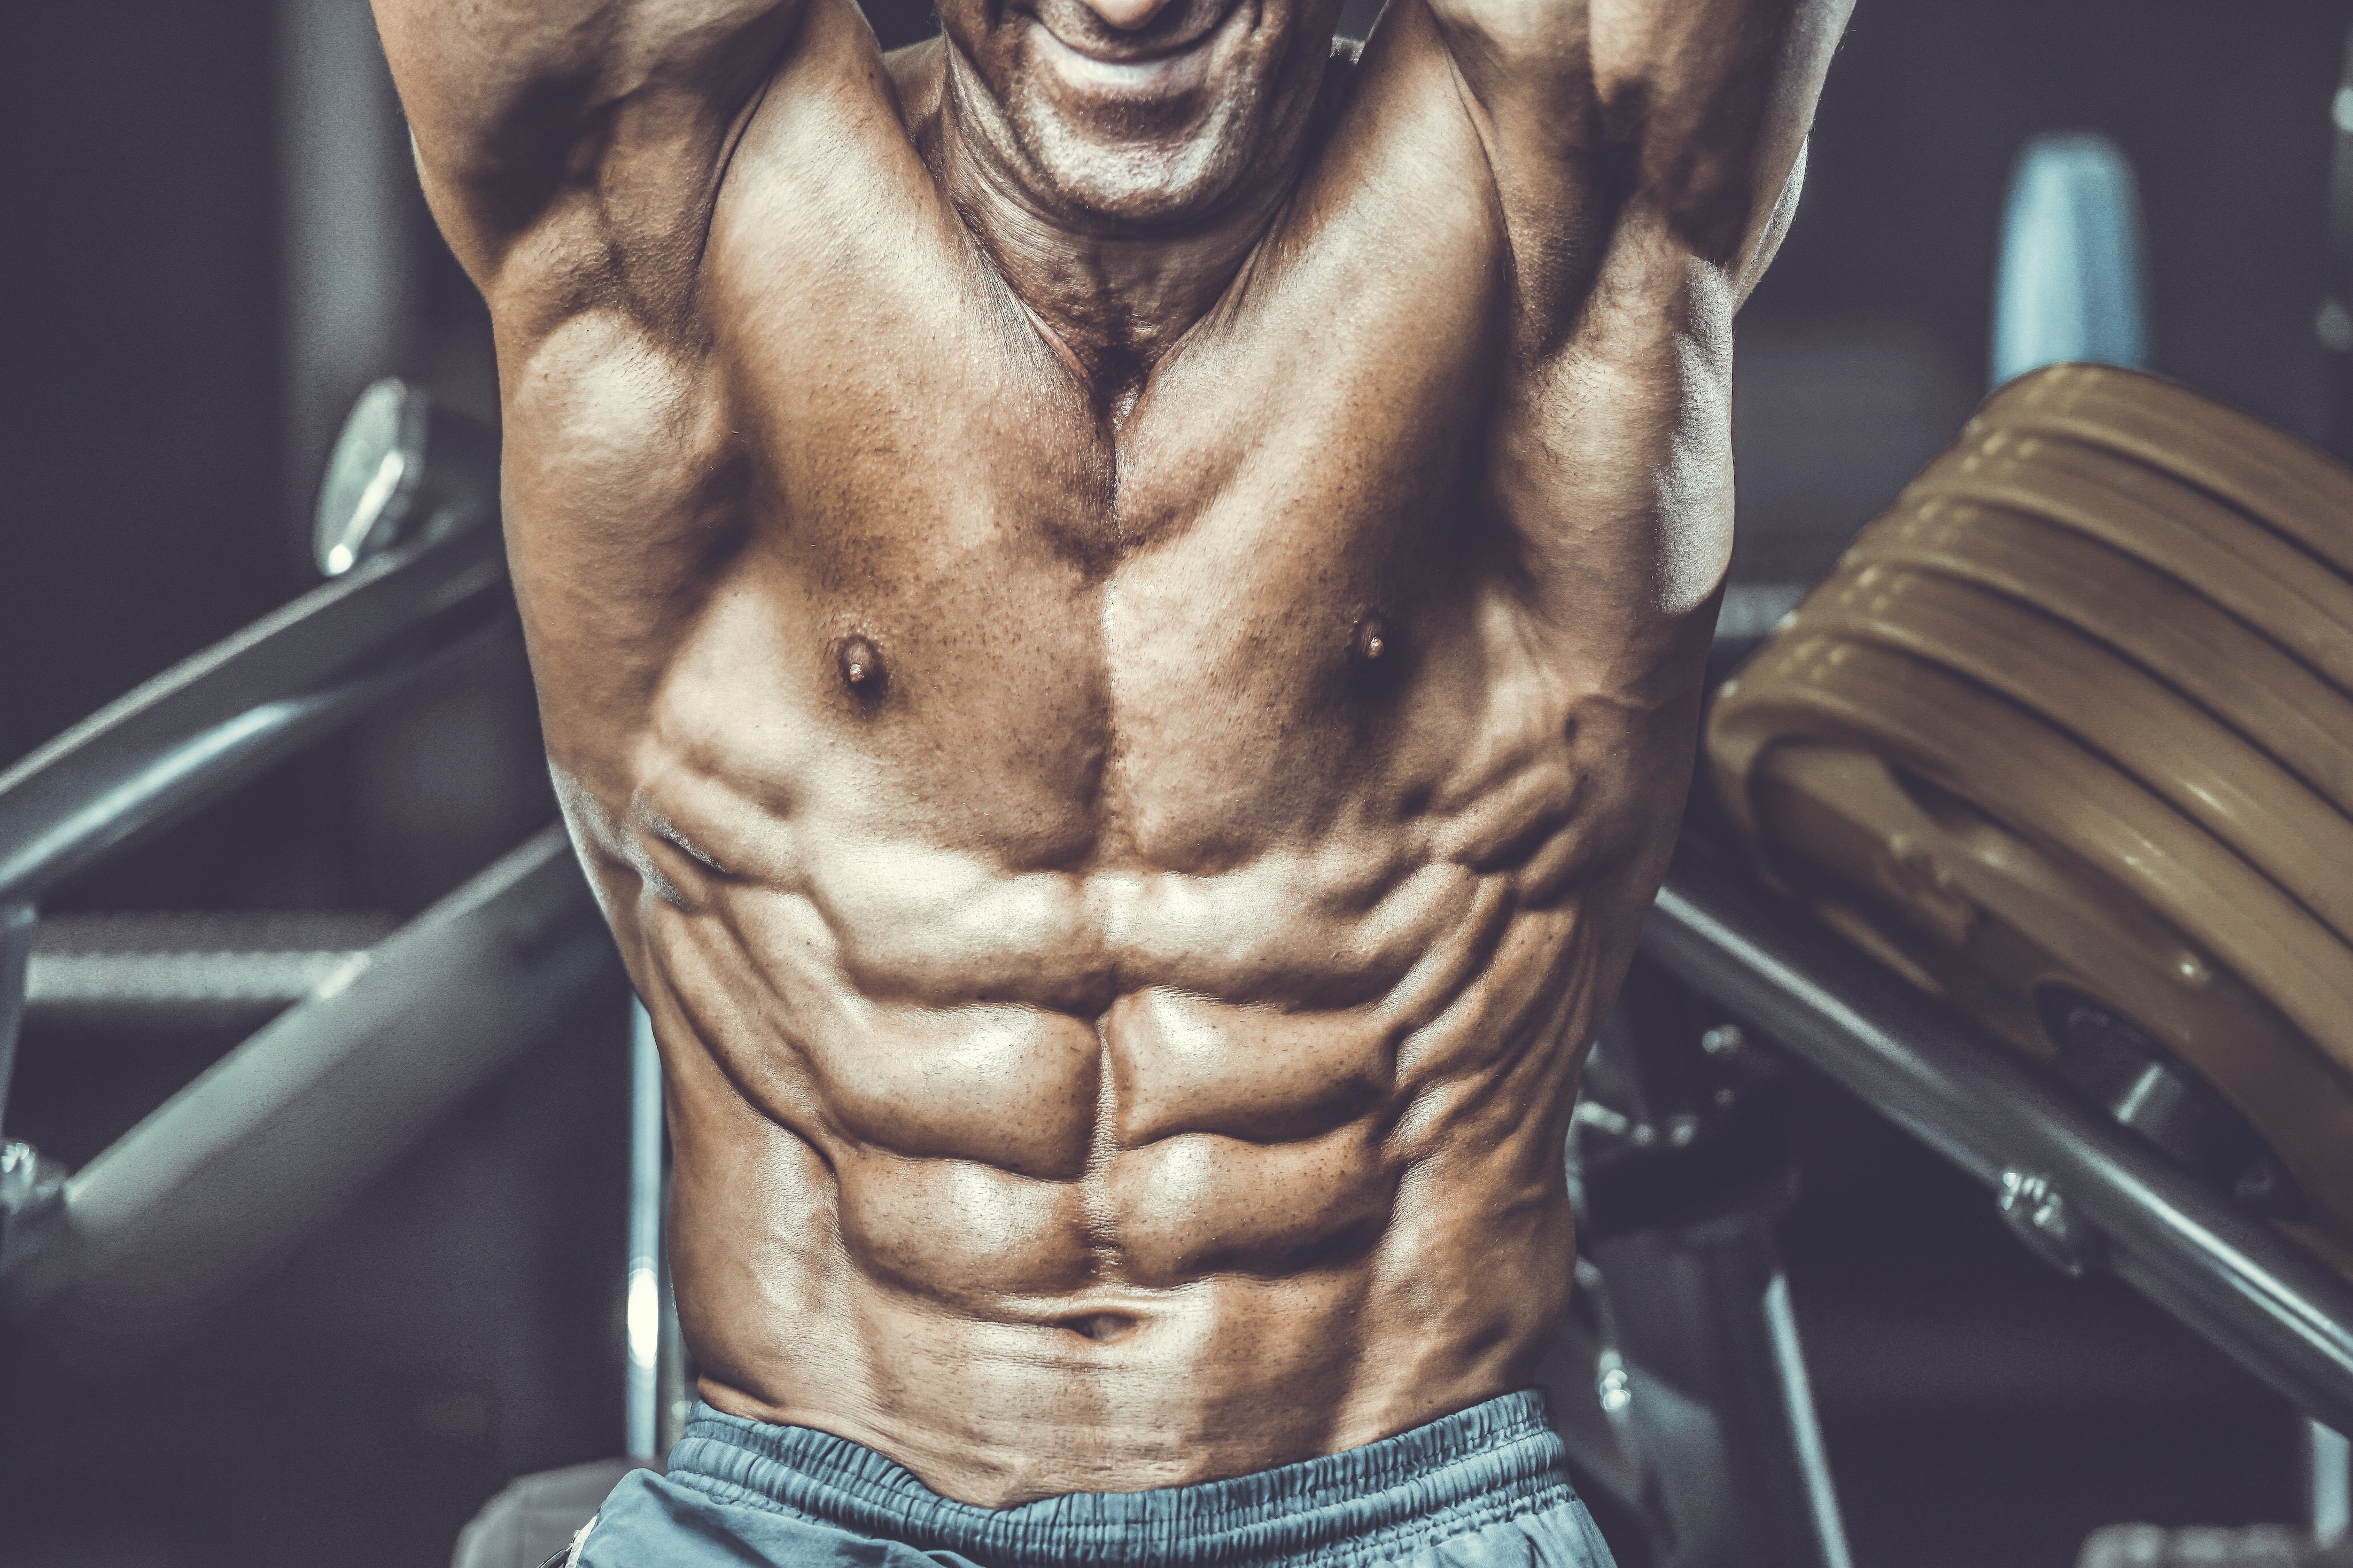 Are 8pack ABS real?